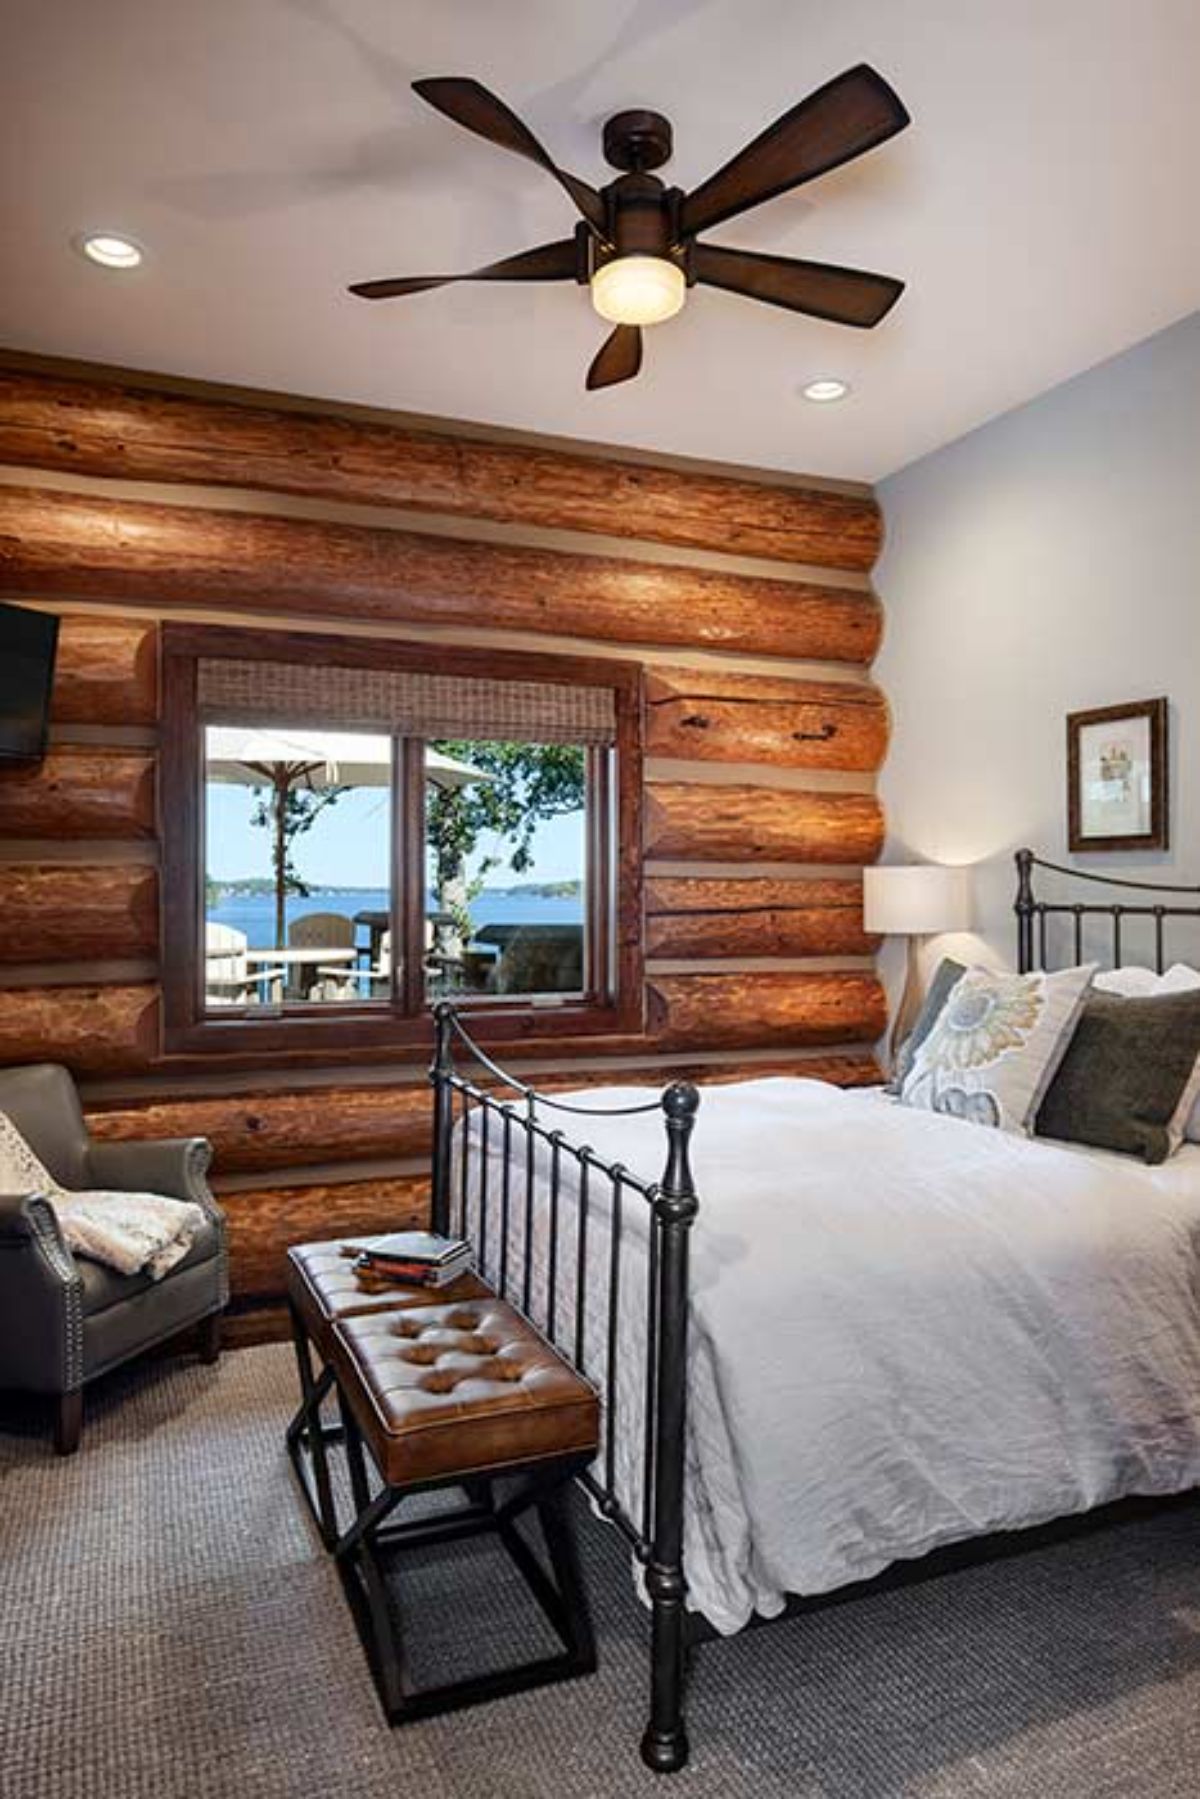 white linens on black iron bedframe in log cabin bedroom with bench at end of bed